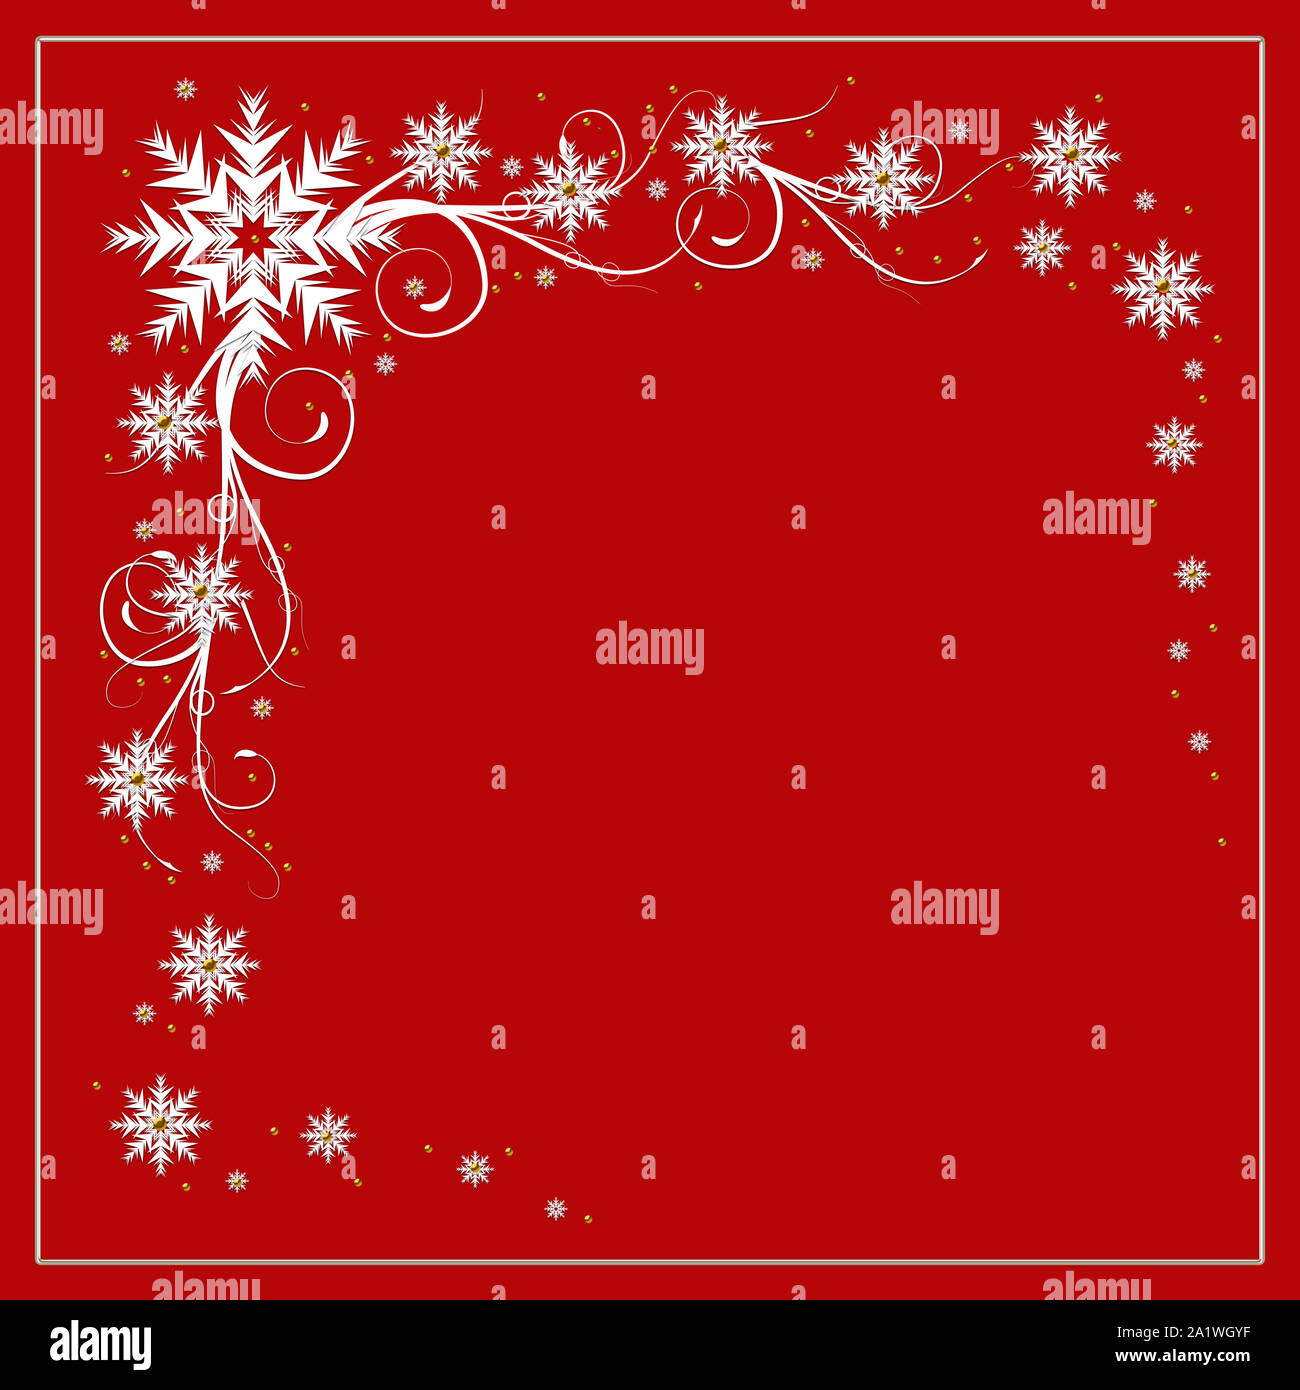 Red square background with decorative white snowflakes and area in center ready for text. Stock Photo